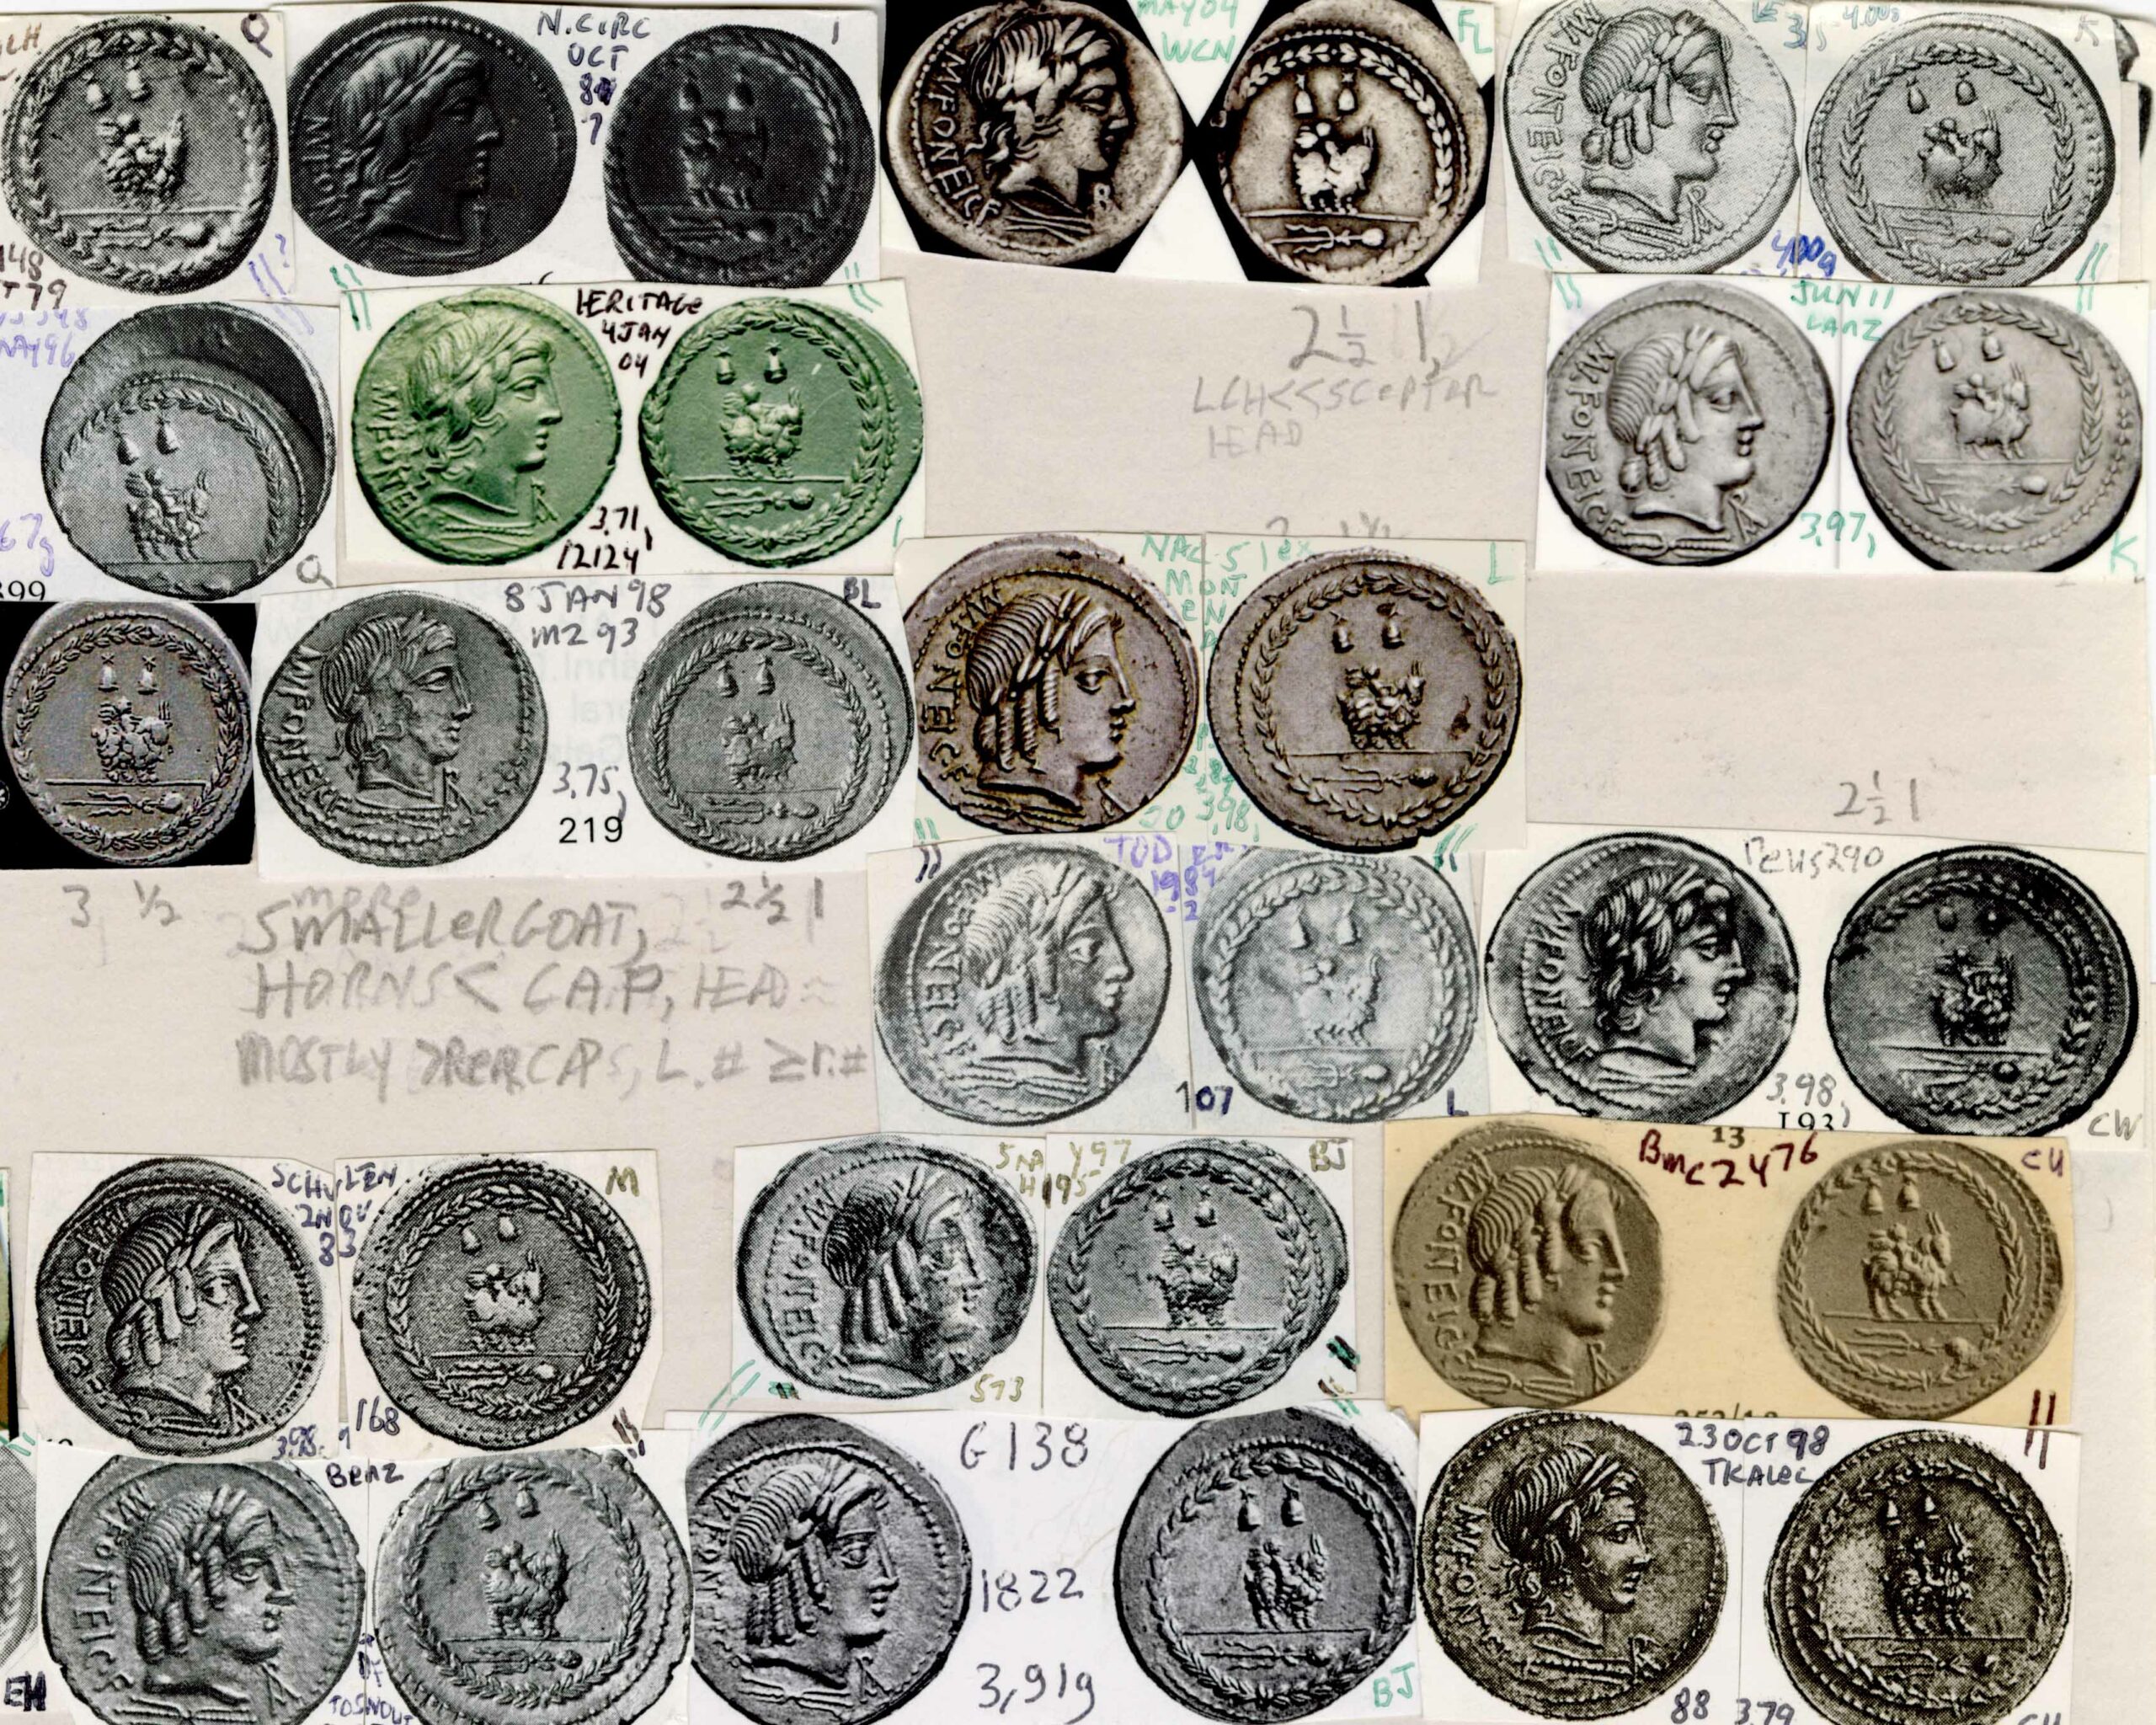 Home - American Numismatic Society